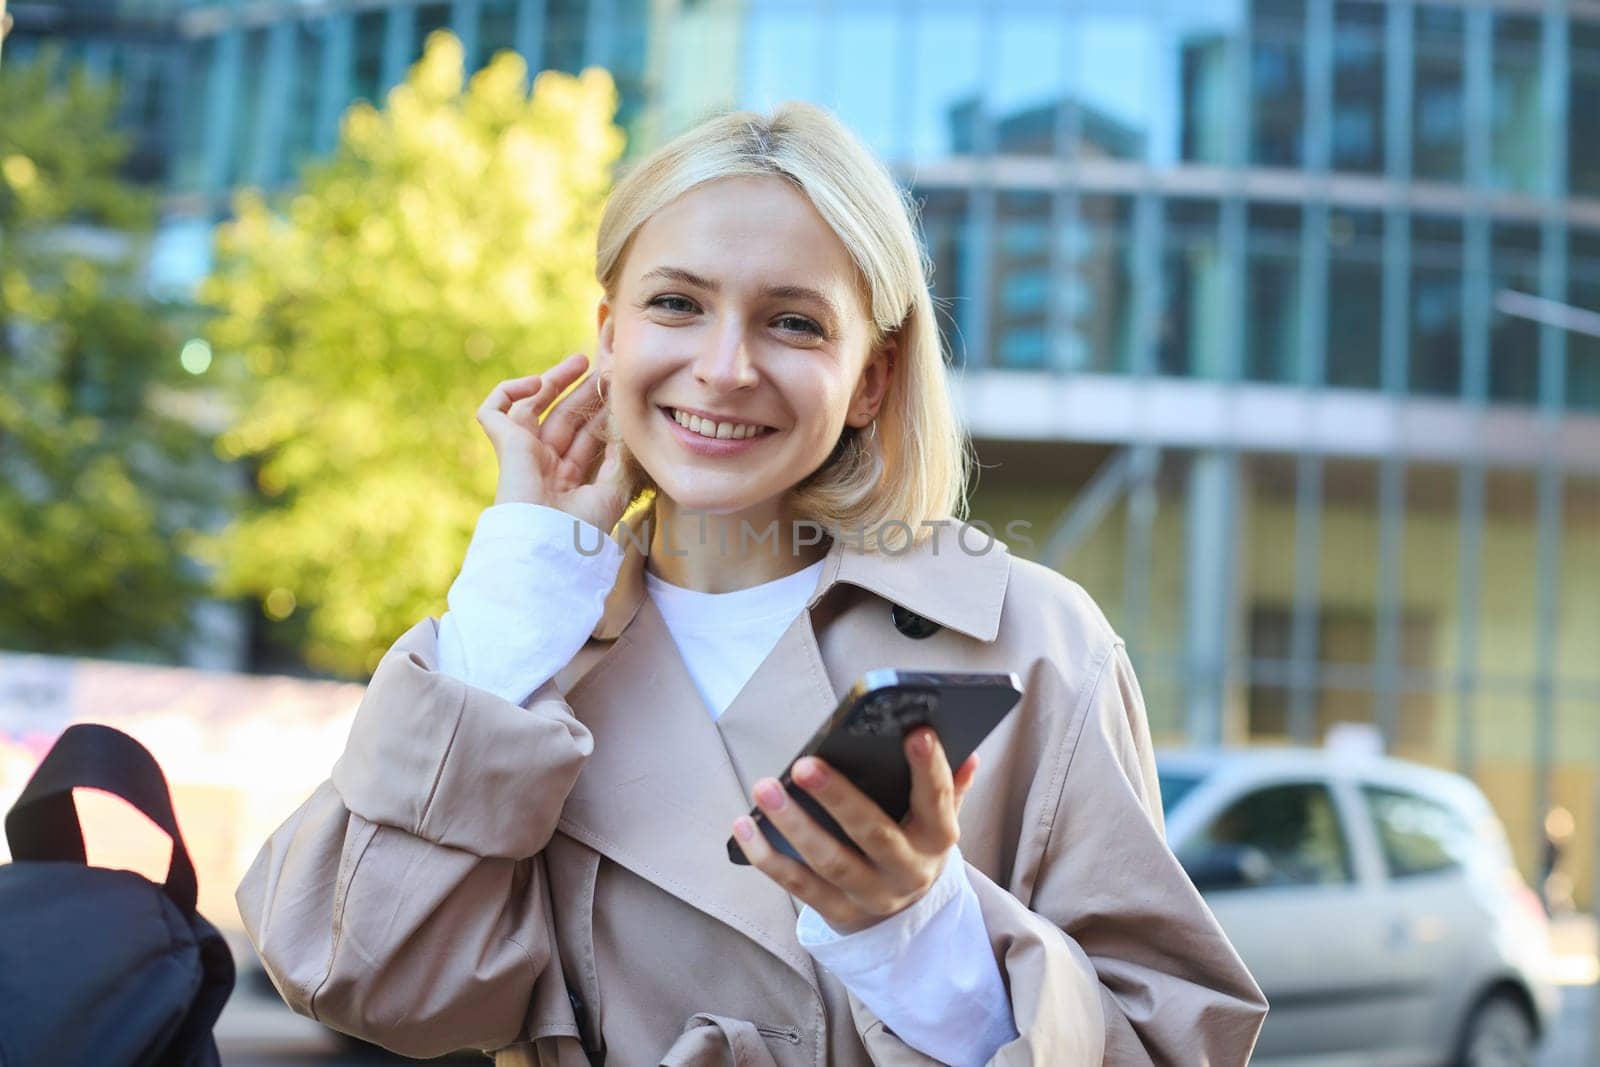 Portrait of carefree smiling woman on street, holding mobile phone, tuck hair behind ear and looking happy at camera, waiting for someone outside.